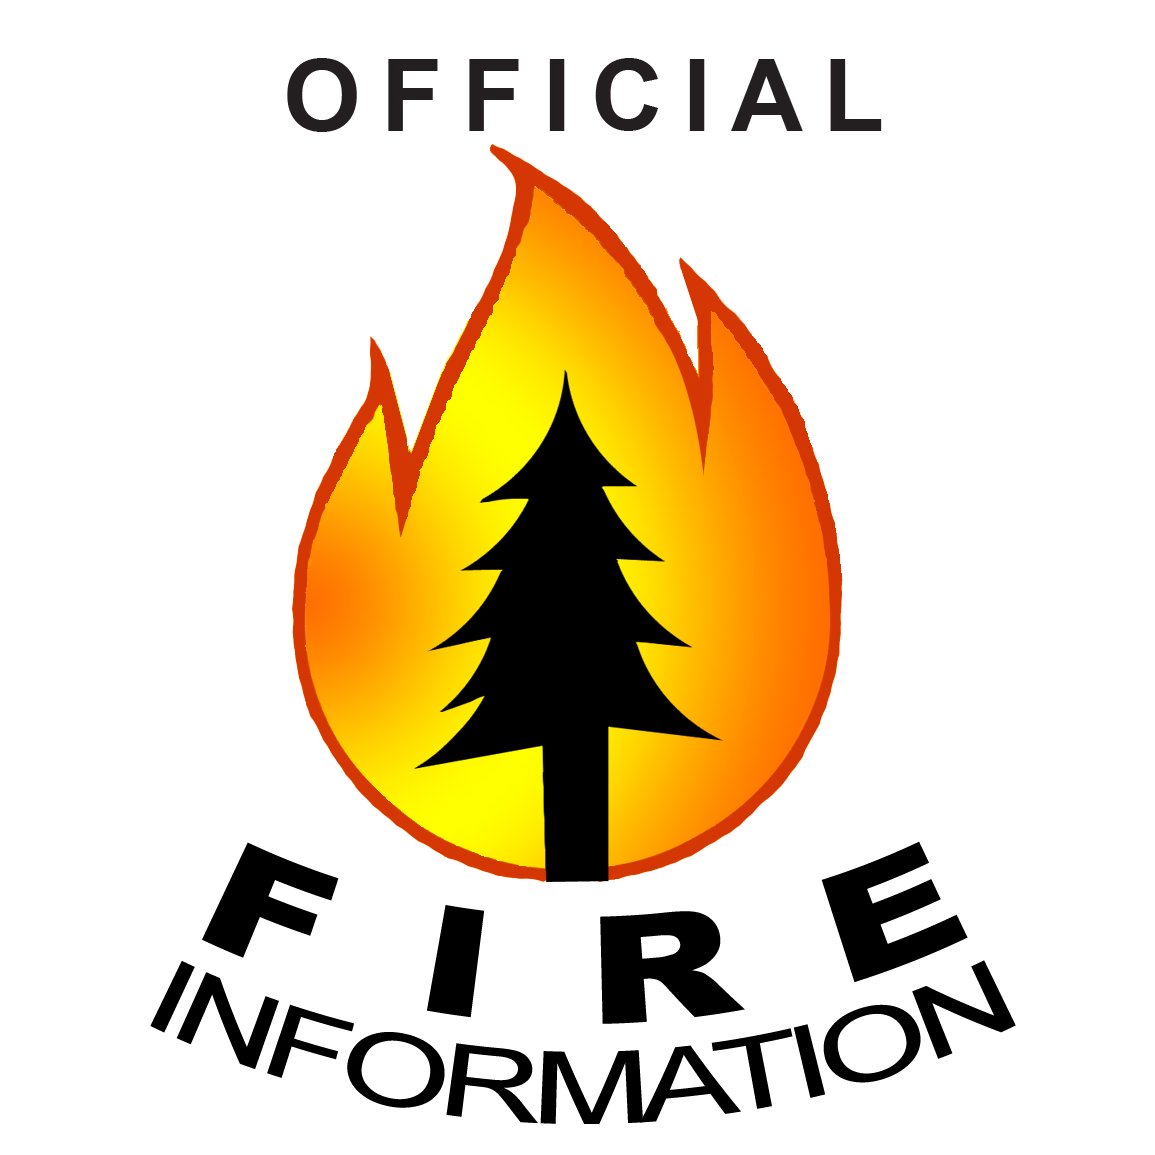 This is the Official Fire Information twitter account for the 2018 Spring Fire in Colorado's Costilla and Huerfano Counties.